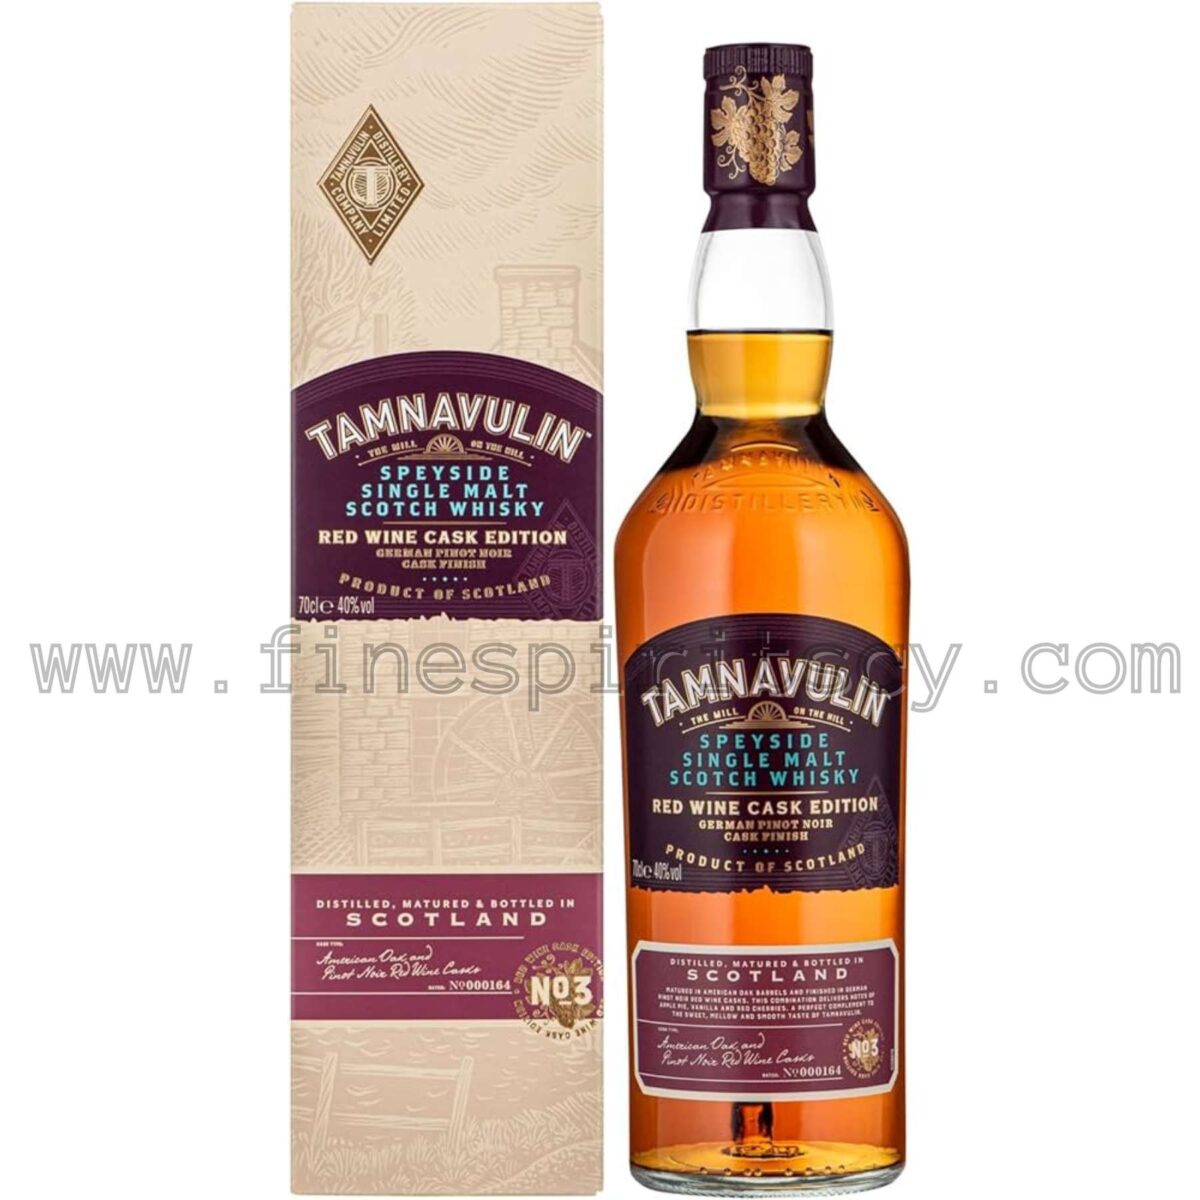 Tamnavulin Red Wine CY Edition German Pinot Noir Cask Finish Price Whisky